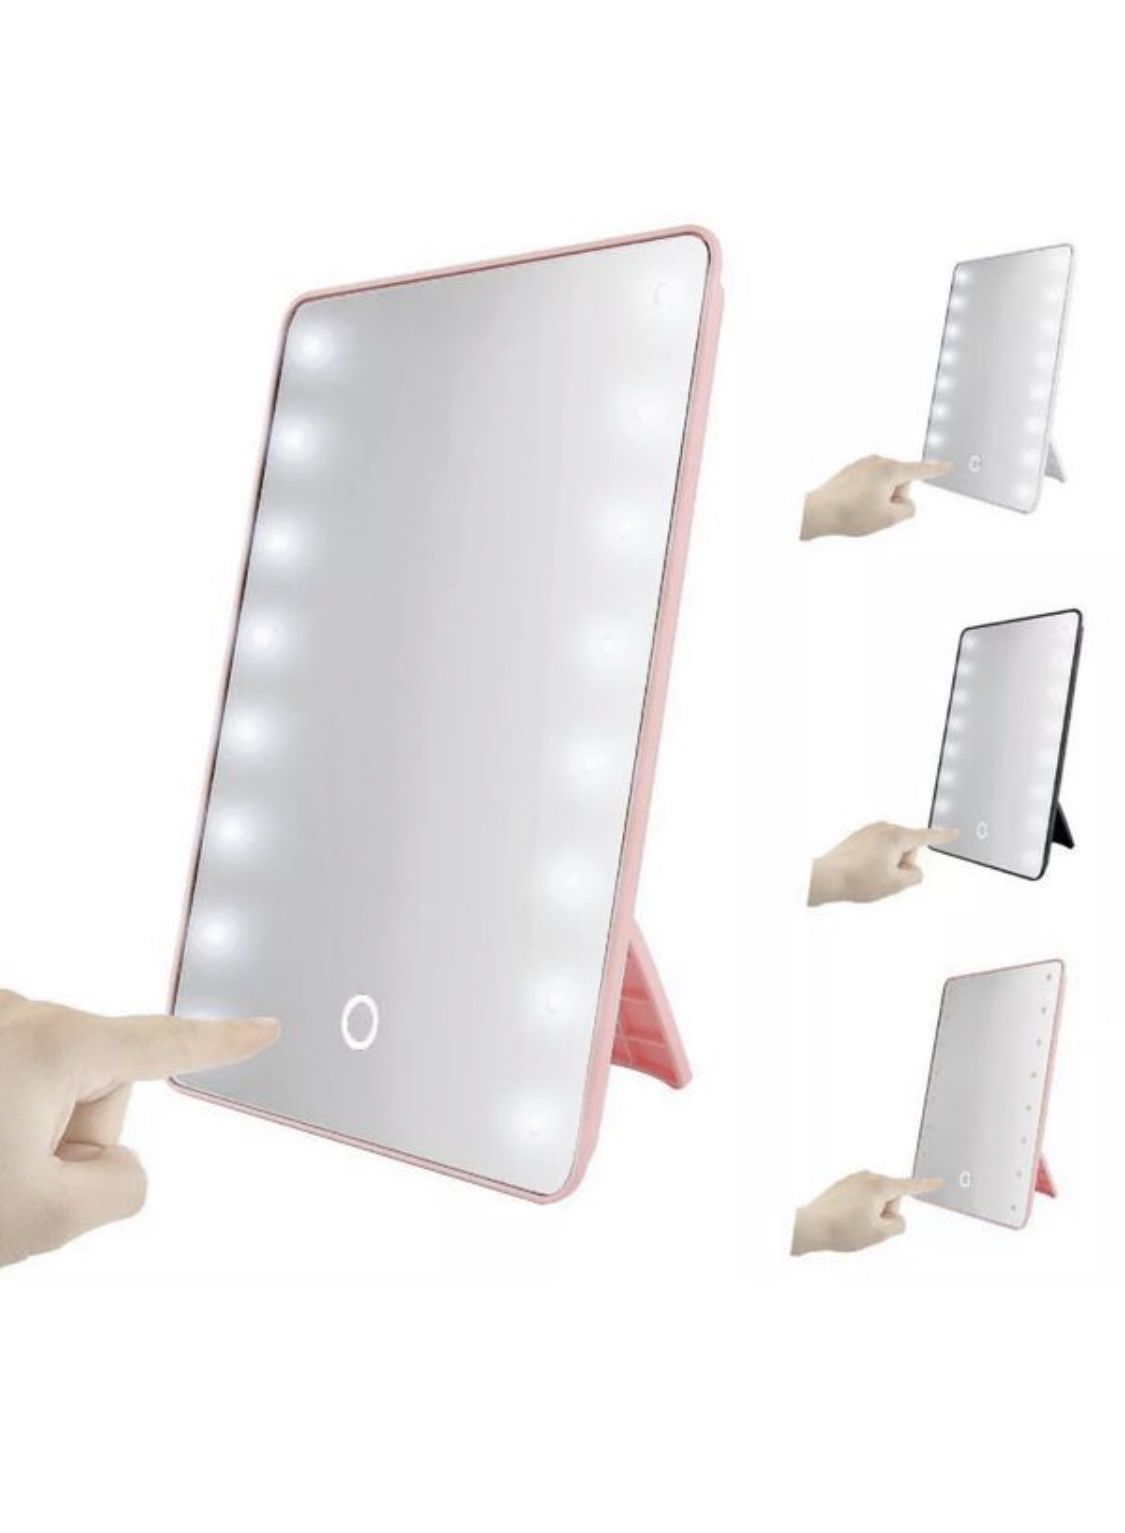 16 LED Light Vanity Mirror 10X Magnifying Touch Screen Makeup Cosmetic Stand